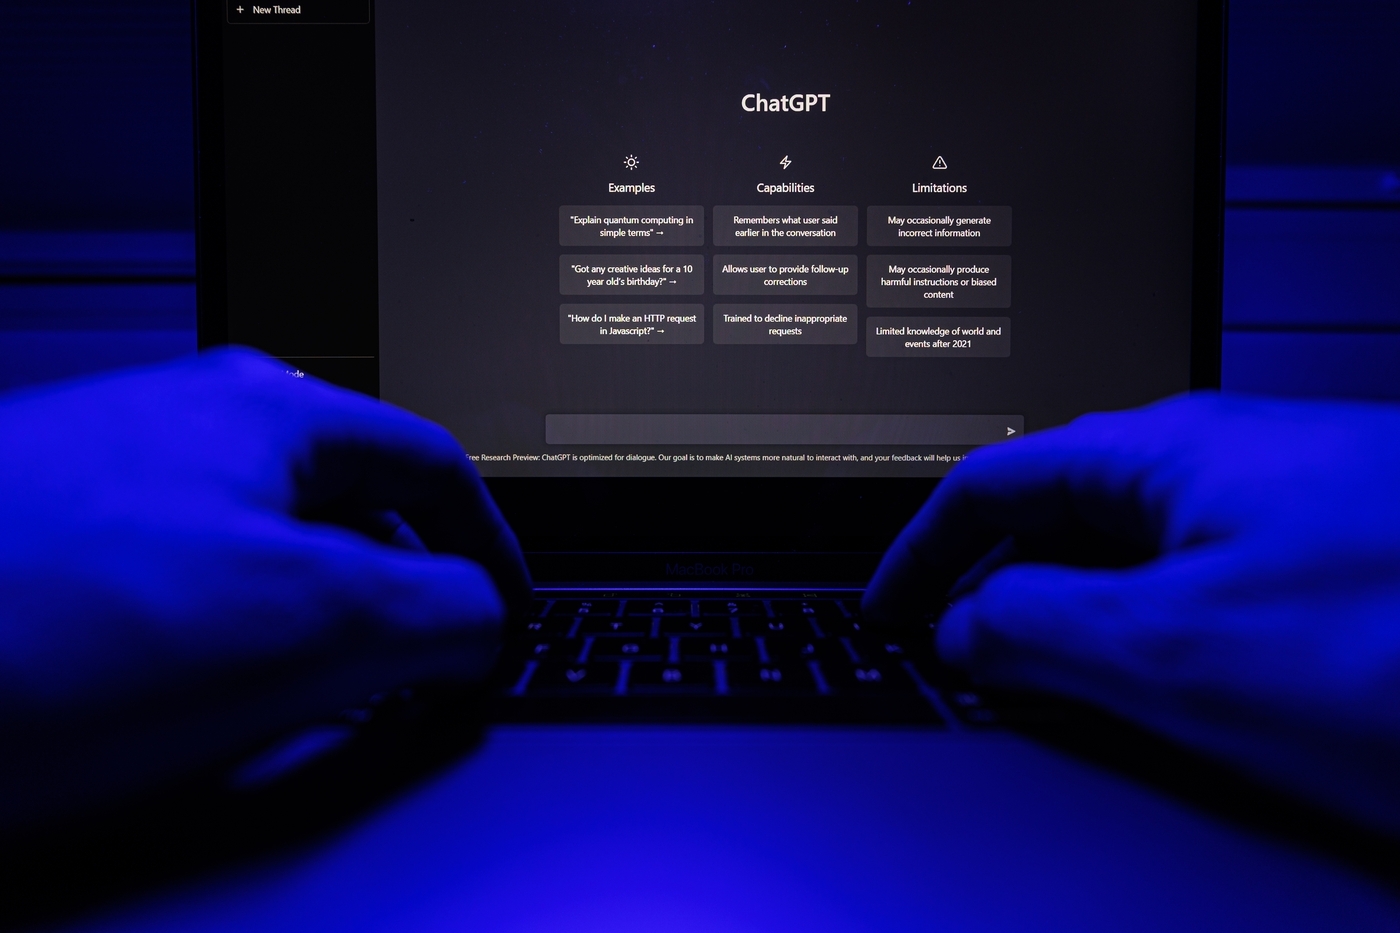 A photo of hands in a dimly lit room with a blue glow typing on a laptop,the screen displays ChatGPT